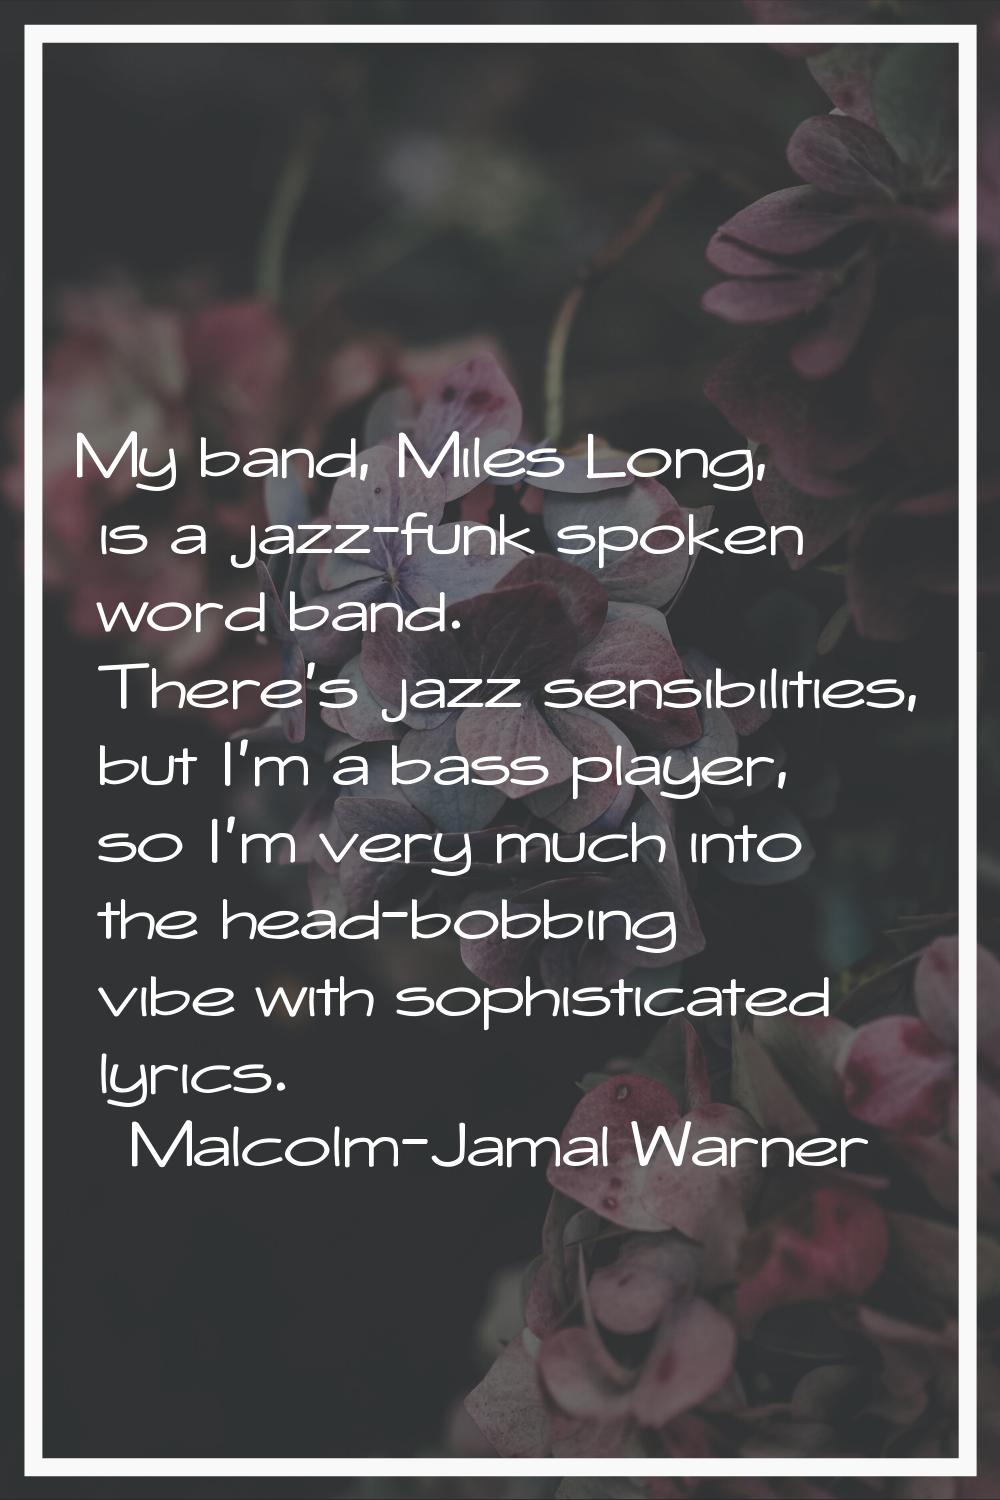 My band, Miles Long, is a jazz-funk spoken word band. There's jazz sensibilities, but I'm a bass pl